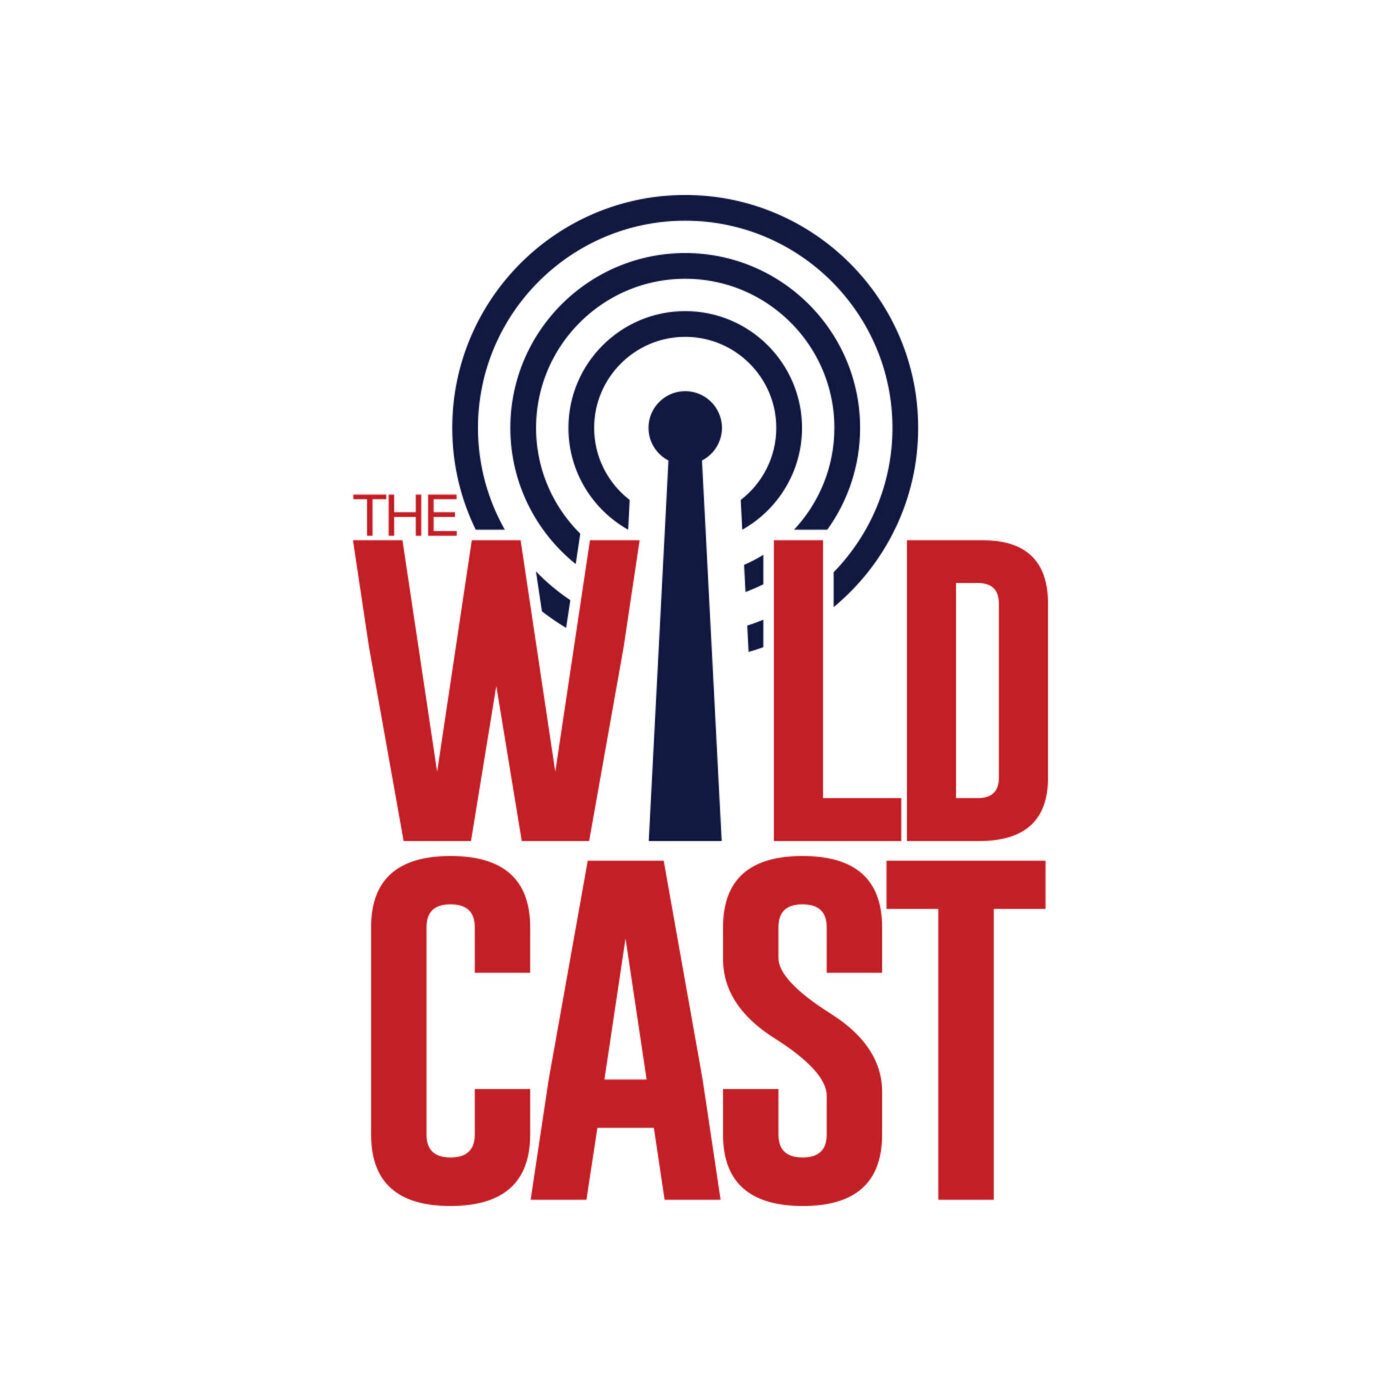 The Wildcast, Episode 370: Arizona dominates Pac-12 awards entering conference tourney in Las Vegas